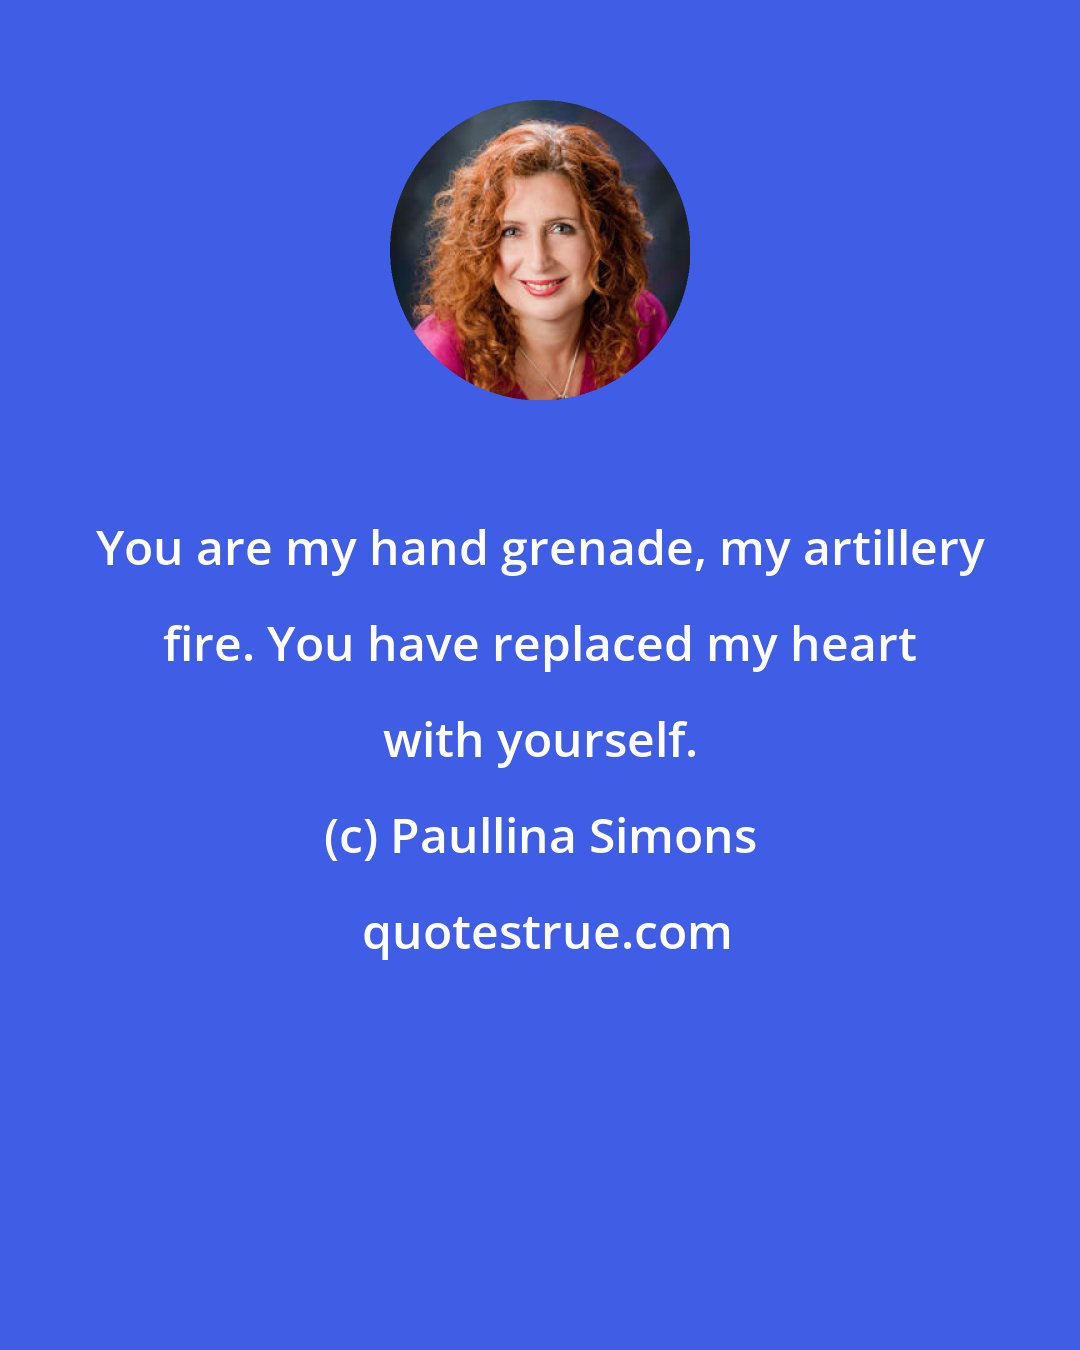 Paullina Simons: You are my hand grenade, my artillery fire. You have replaced my heart with yourself.